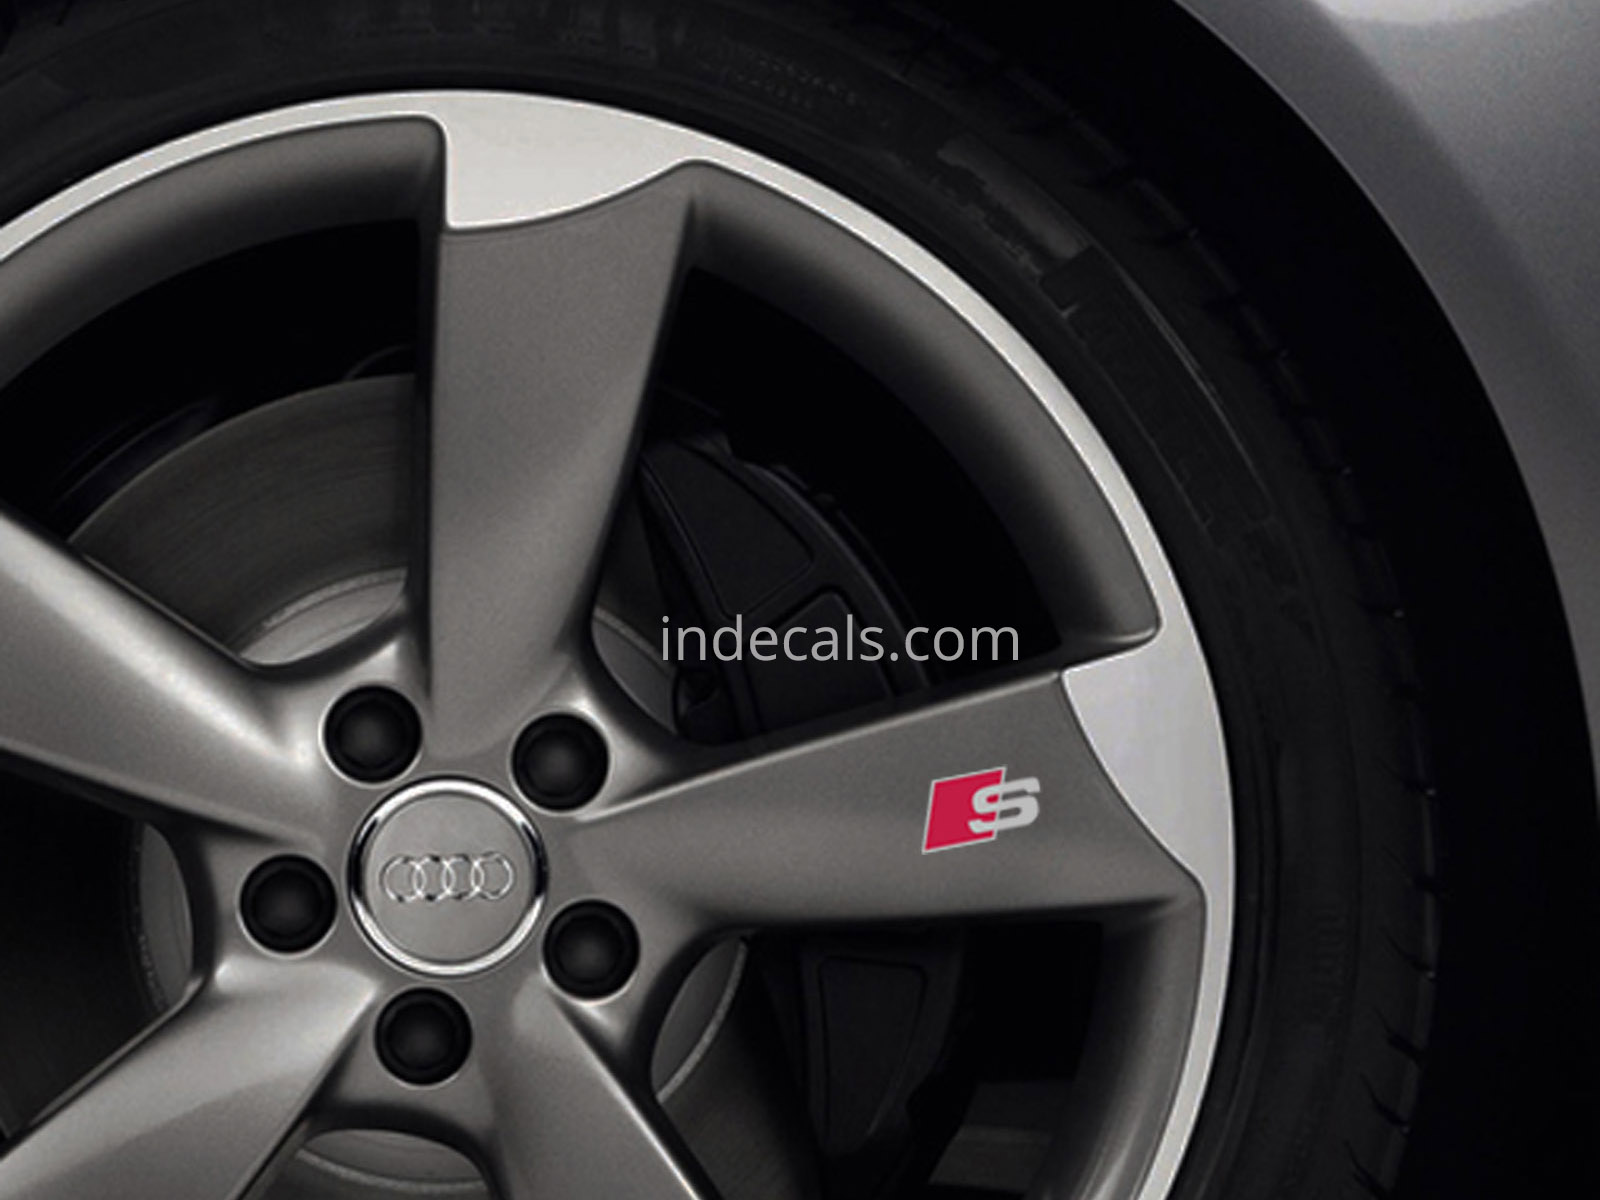 5 x Audi S-Line Stickers for Wheels - Silver + Red